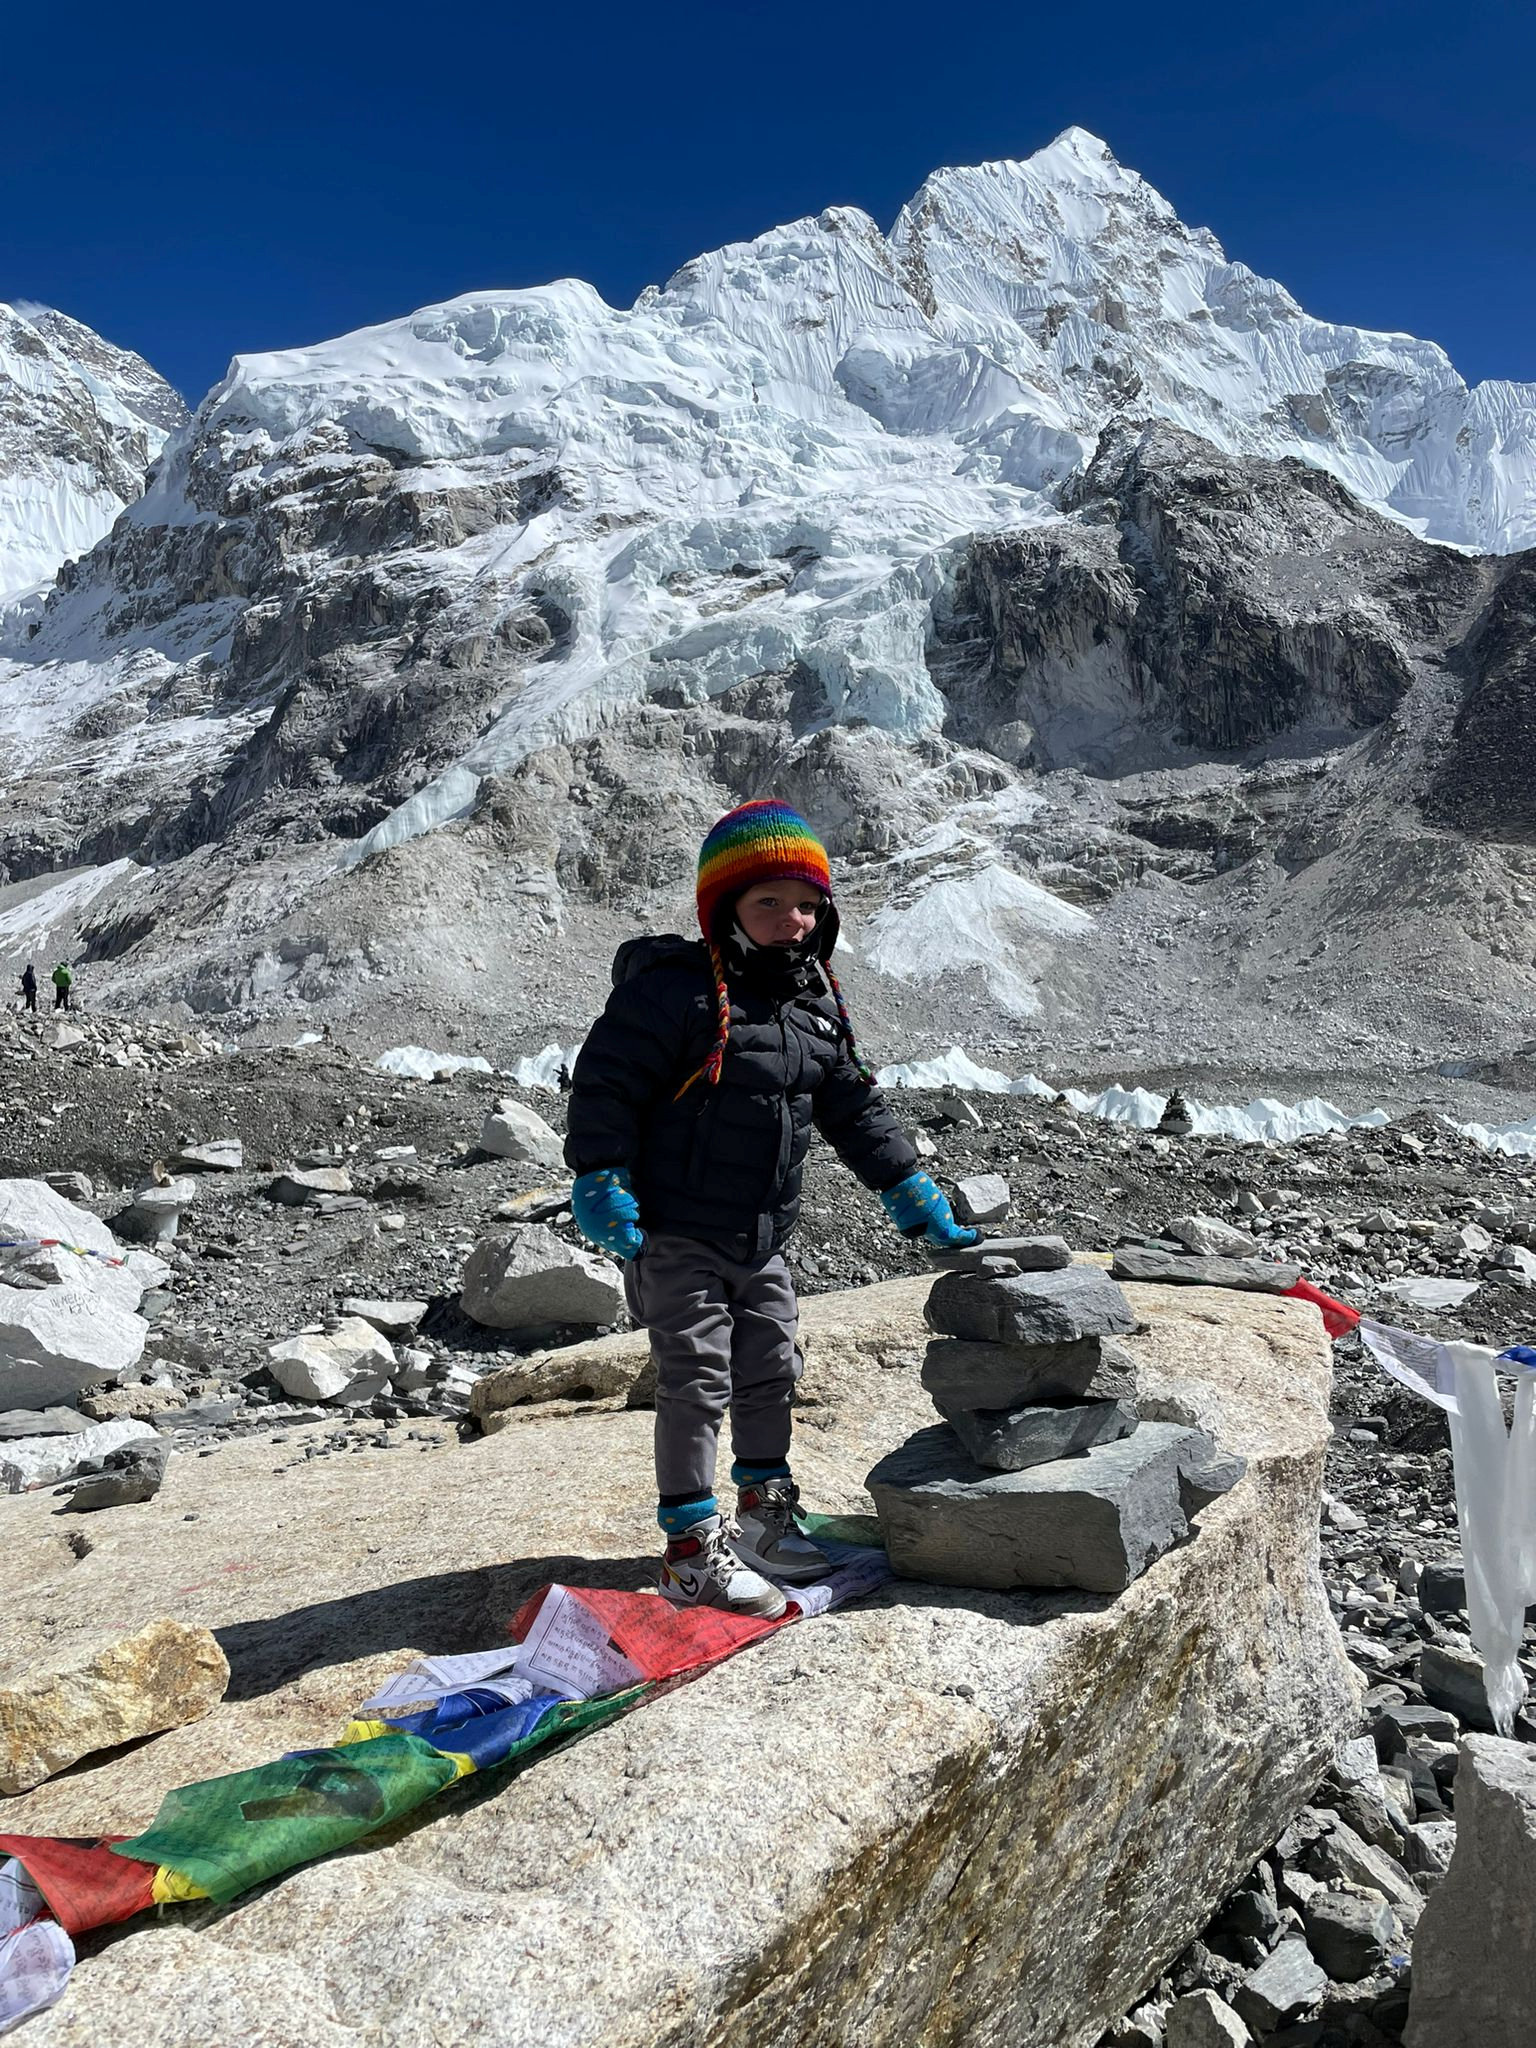 Carter made it to the south site in Nepal — 17,598ft above sea level